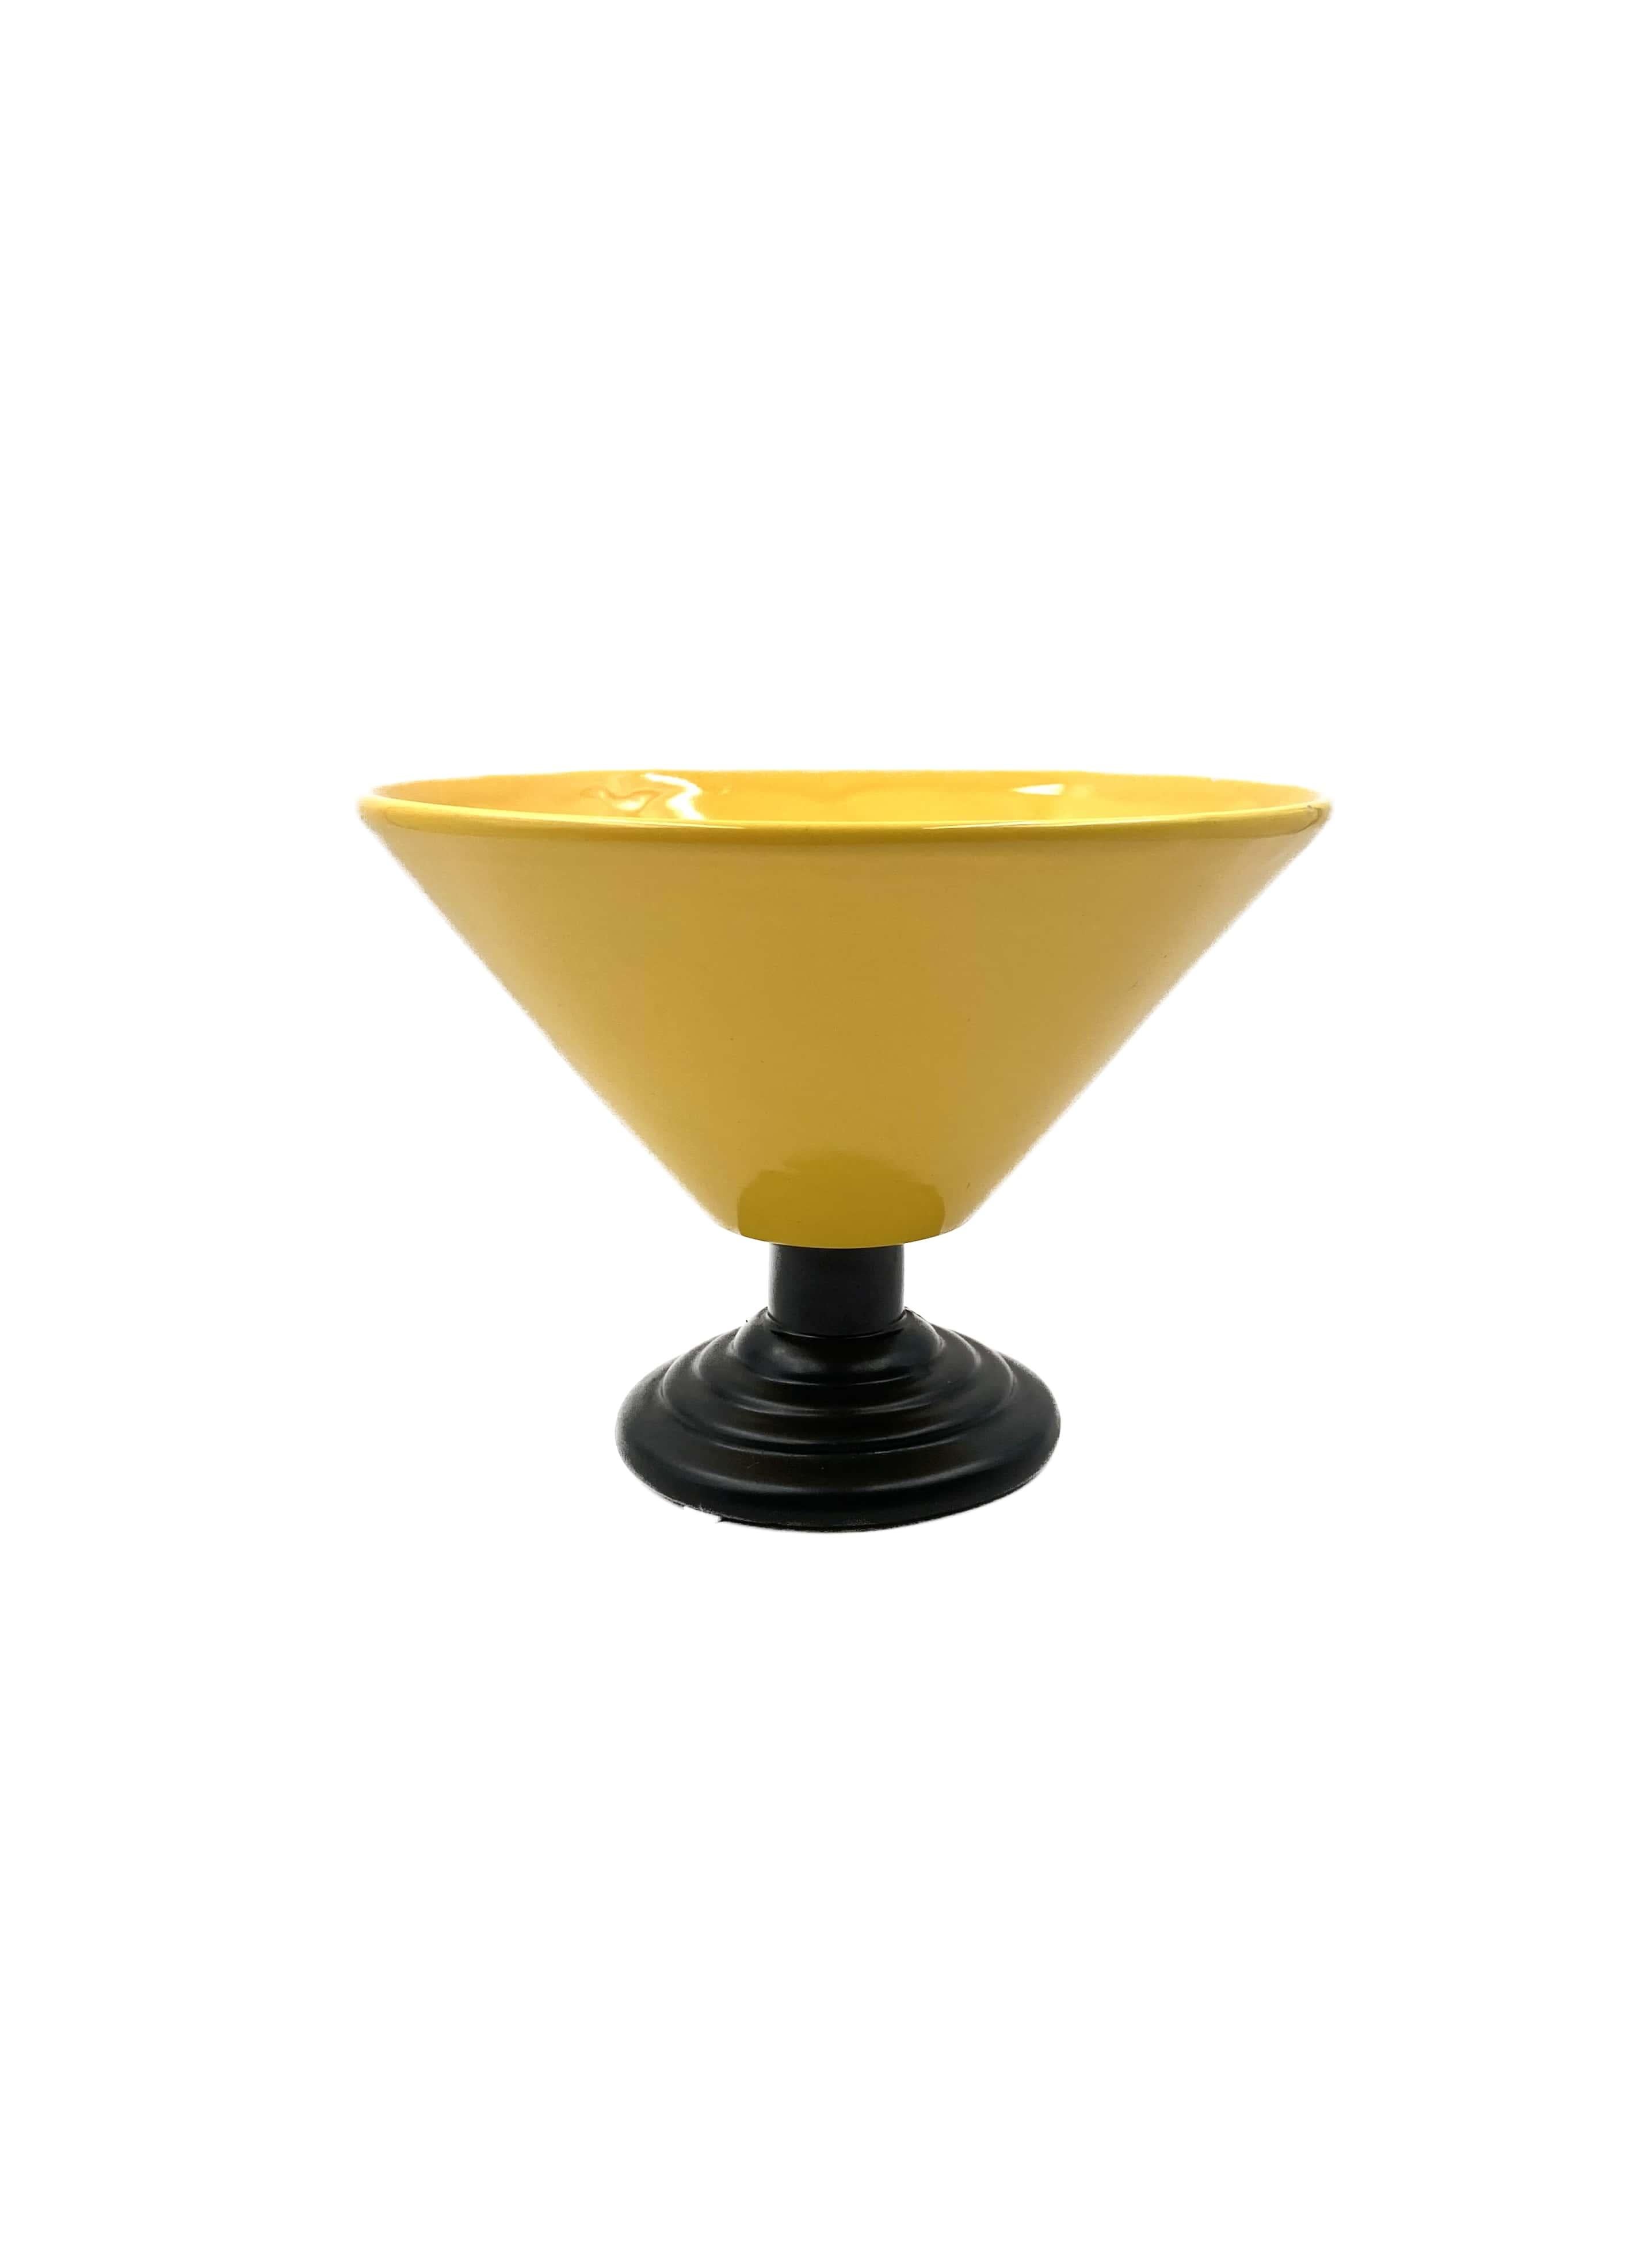 Post-Modern Yellow Conic Vase, Postmodern Memphis Milan Style, Italy 1980s For Sale